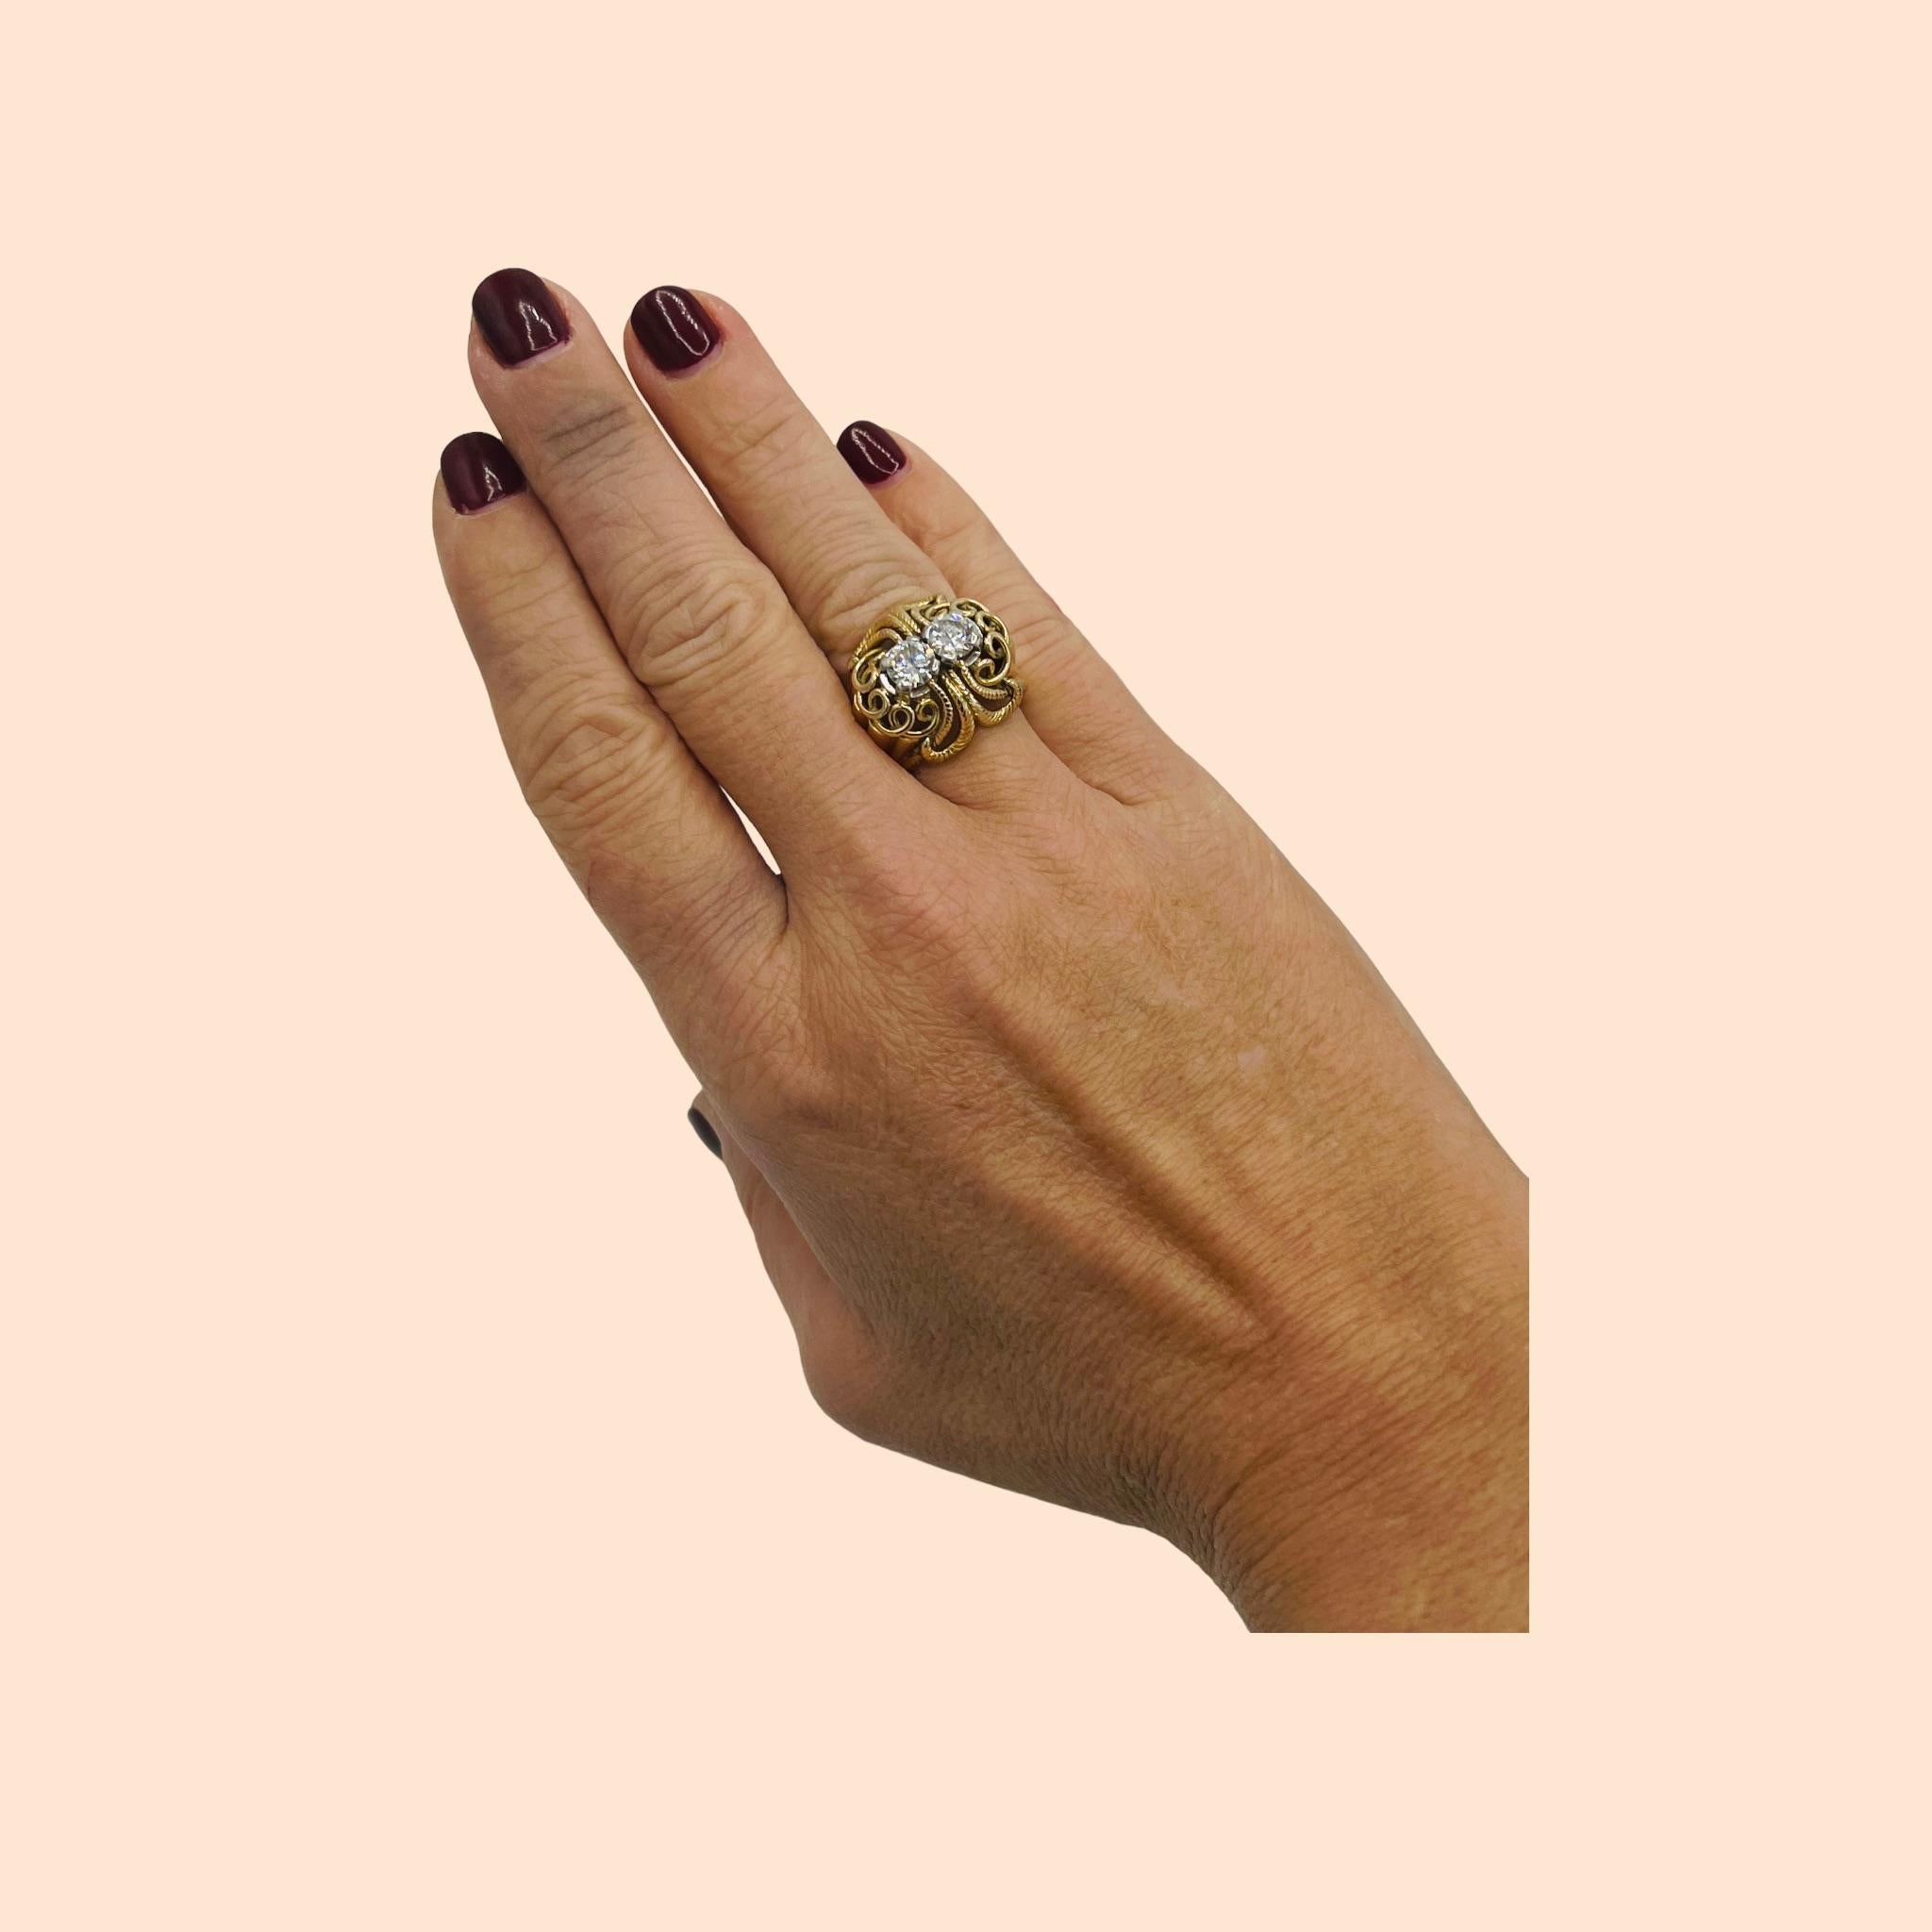 superb cocktail ring from the 1950s in 18 carat gold, set with two modern cut diamonds
( 2 diamonds for 1 carat )
weighing 12.68 grams, size 52.5 or 6
width of the ring: 1.8cm
size reduction offered